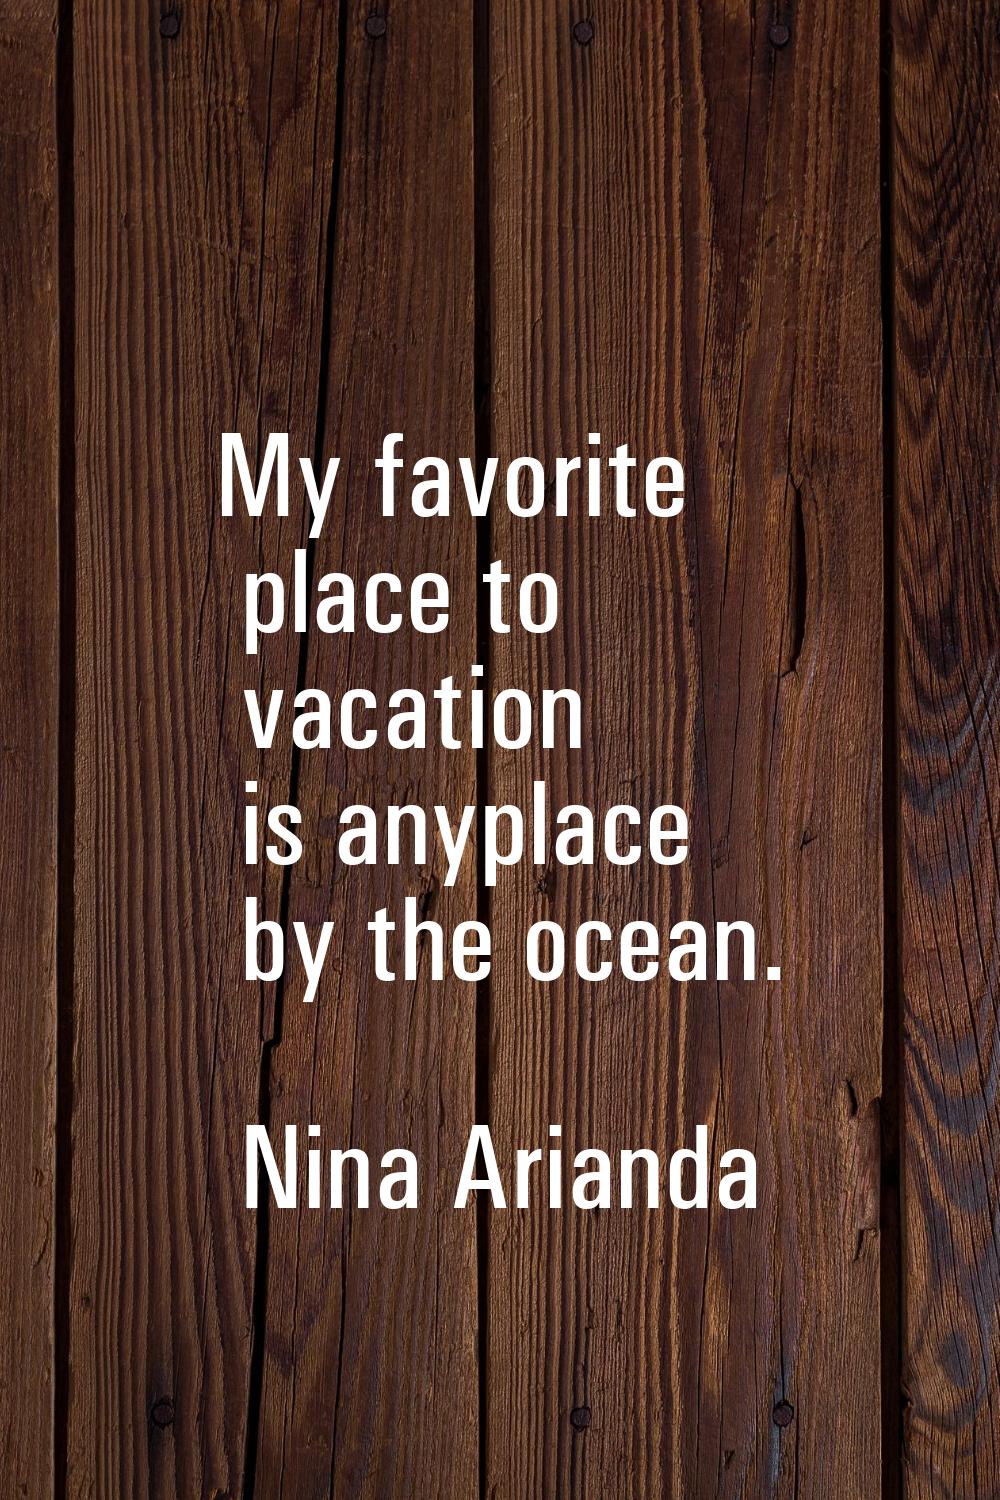 My favorite place to vacation is anyplace by the ocean.